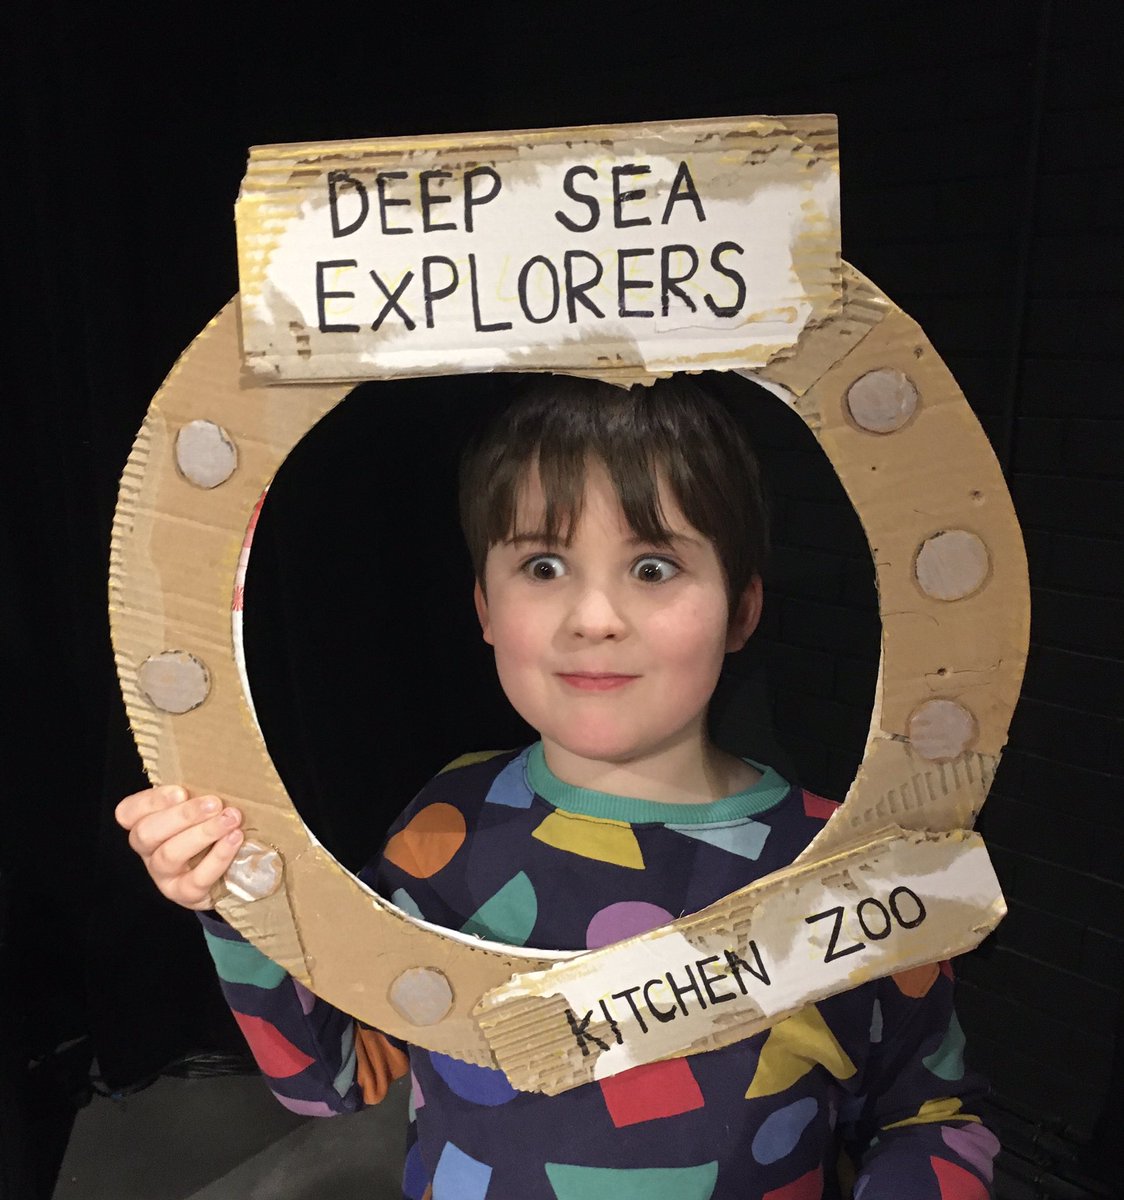 Thanks to @KitchenZoo_ for a brilliant session of deep sea exploring at @QueensHall. I think a giant squid has loomed into view 😀